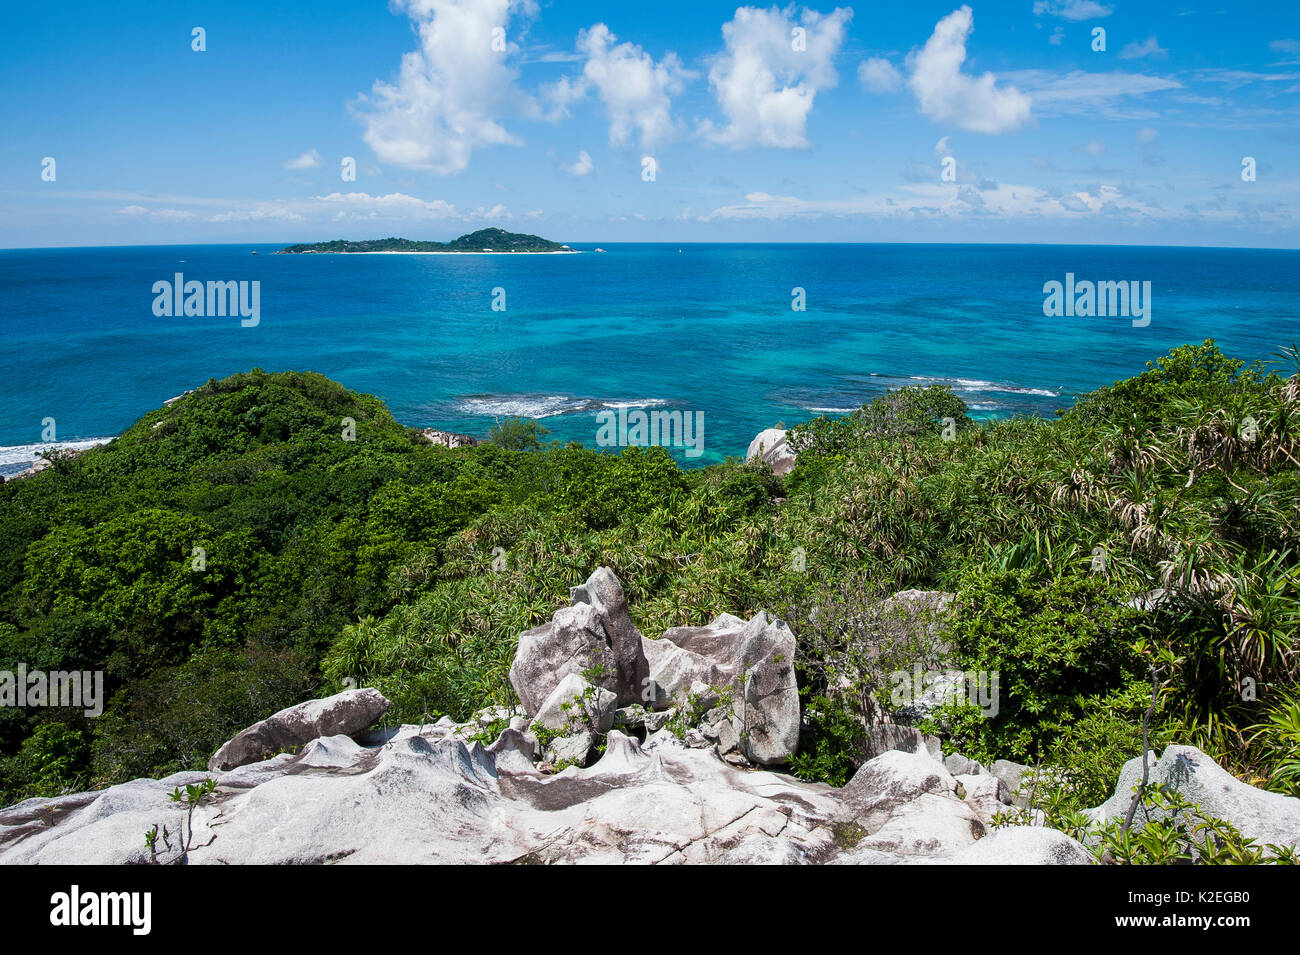 Cousine Island, a privately owned island and nature reserve, one of the few remaining rat-free islands of the inner Seychelles, off the south-west coast of Praslin Island, seen from Cousin Island, Republic of Seychelles Stock Photo